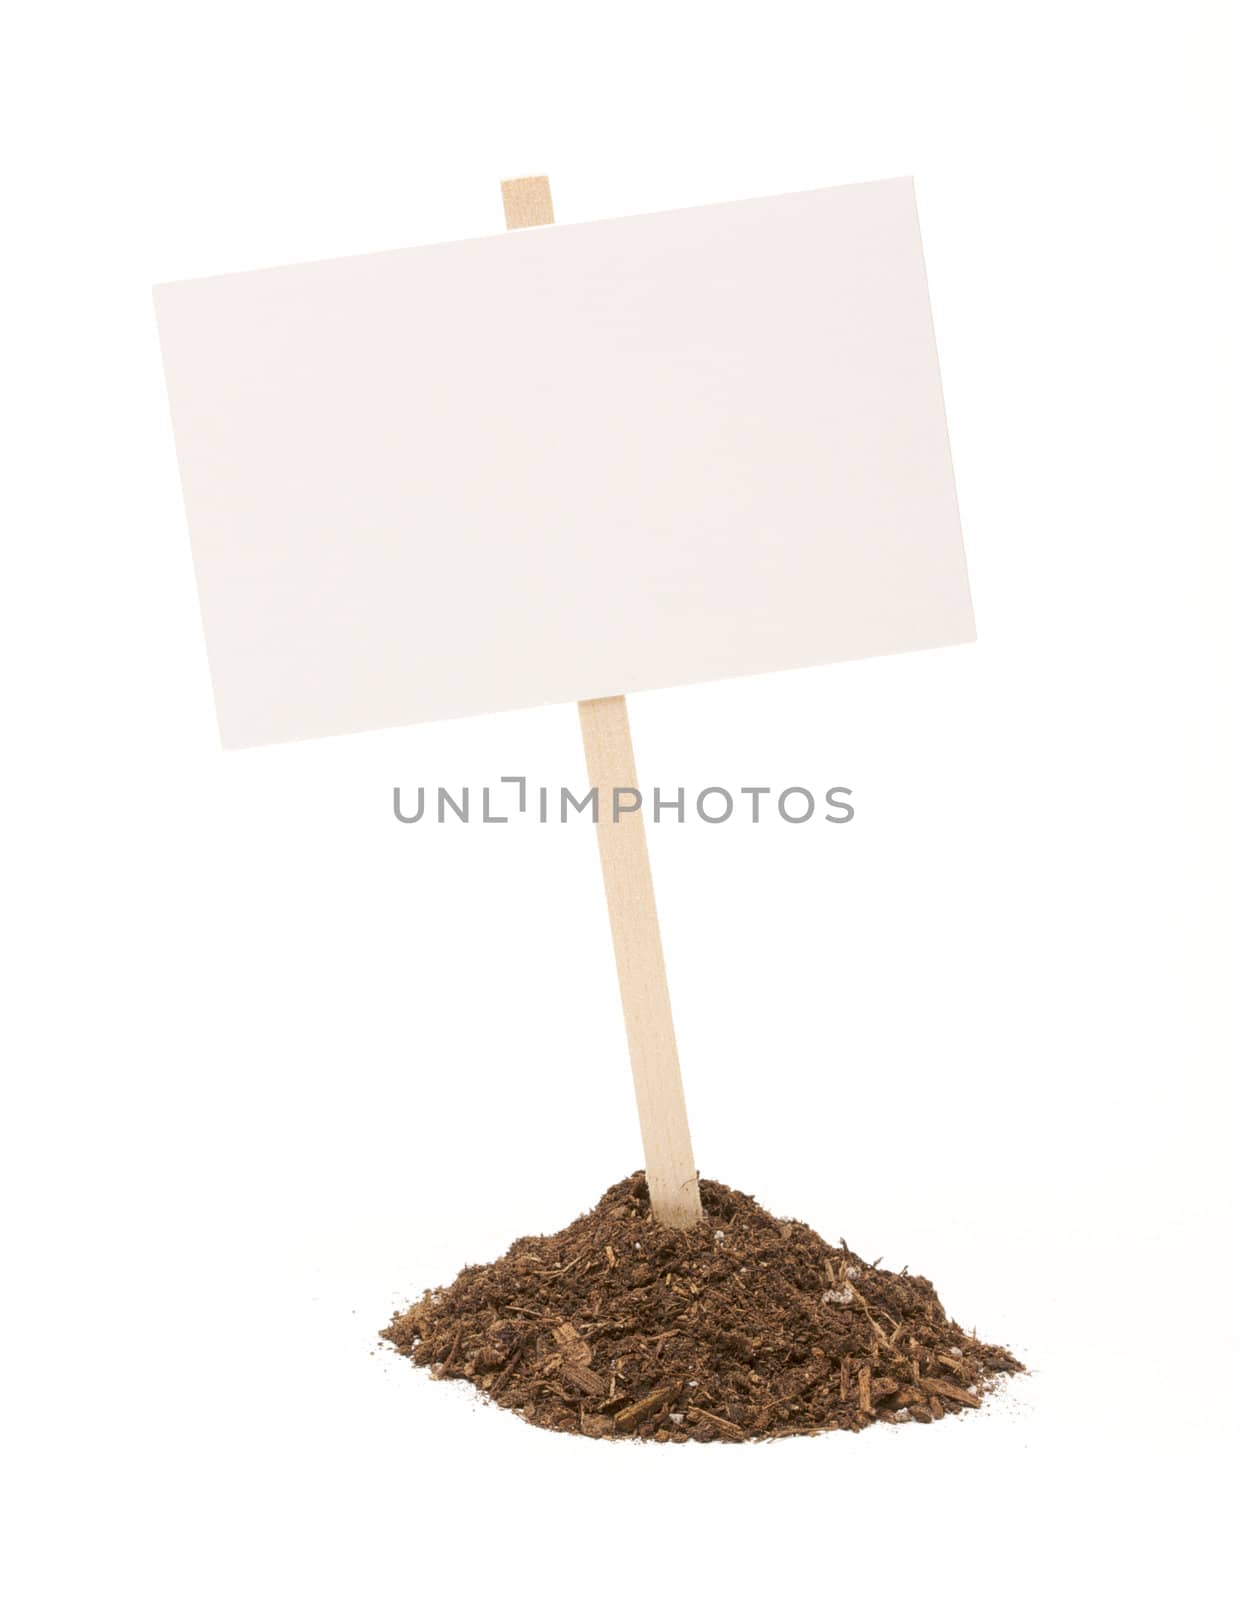 Blank White Sign in Dirt Pile Isolated by Feverpitched